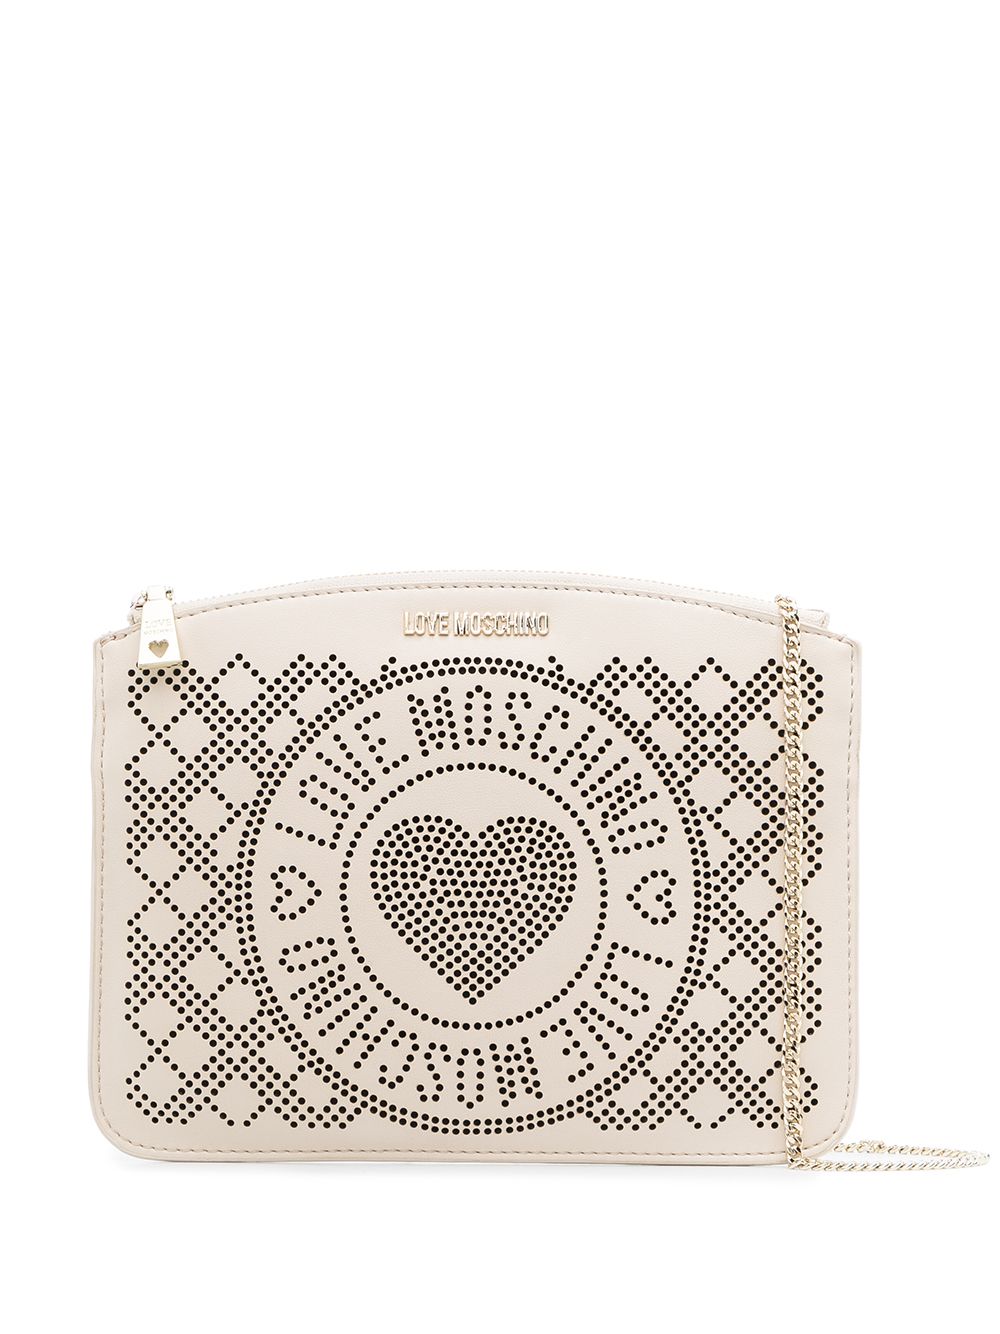 LOVE MOSCHINO PERFORATED LOGO CLUTCH